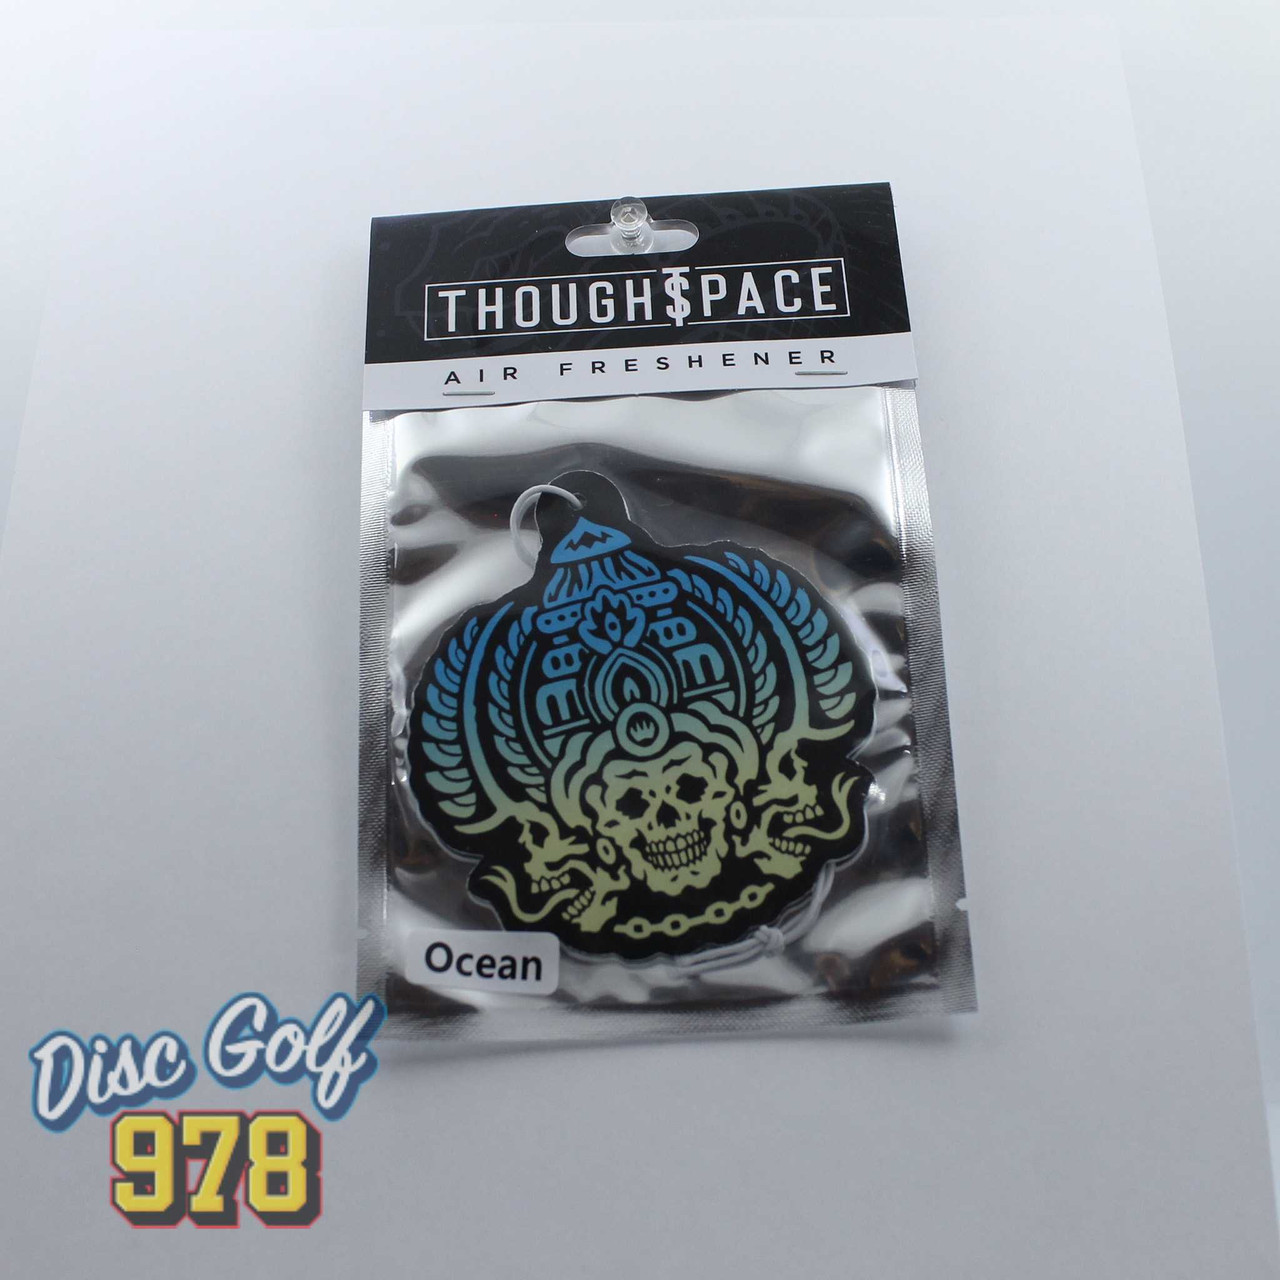 Thought Space Air Freshener Disc God Ocean